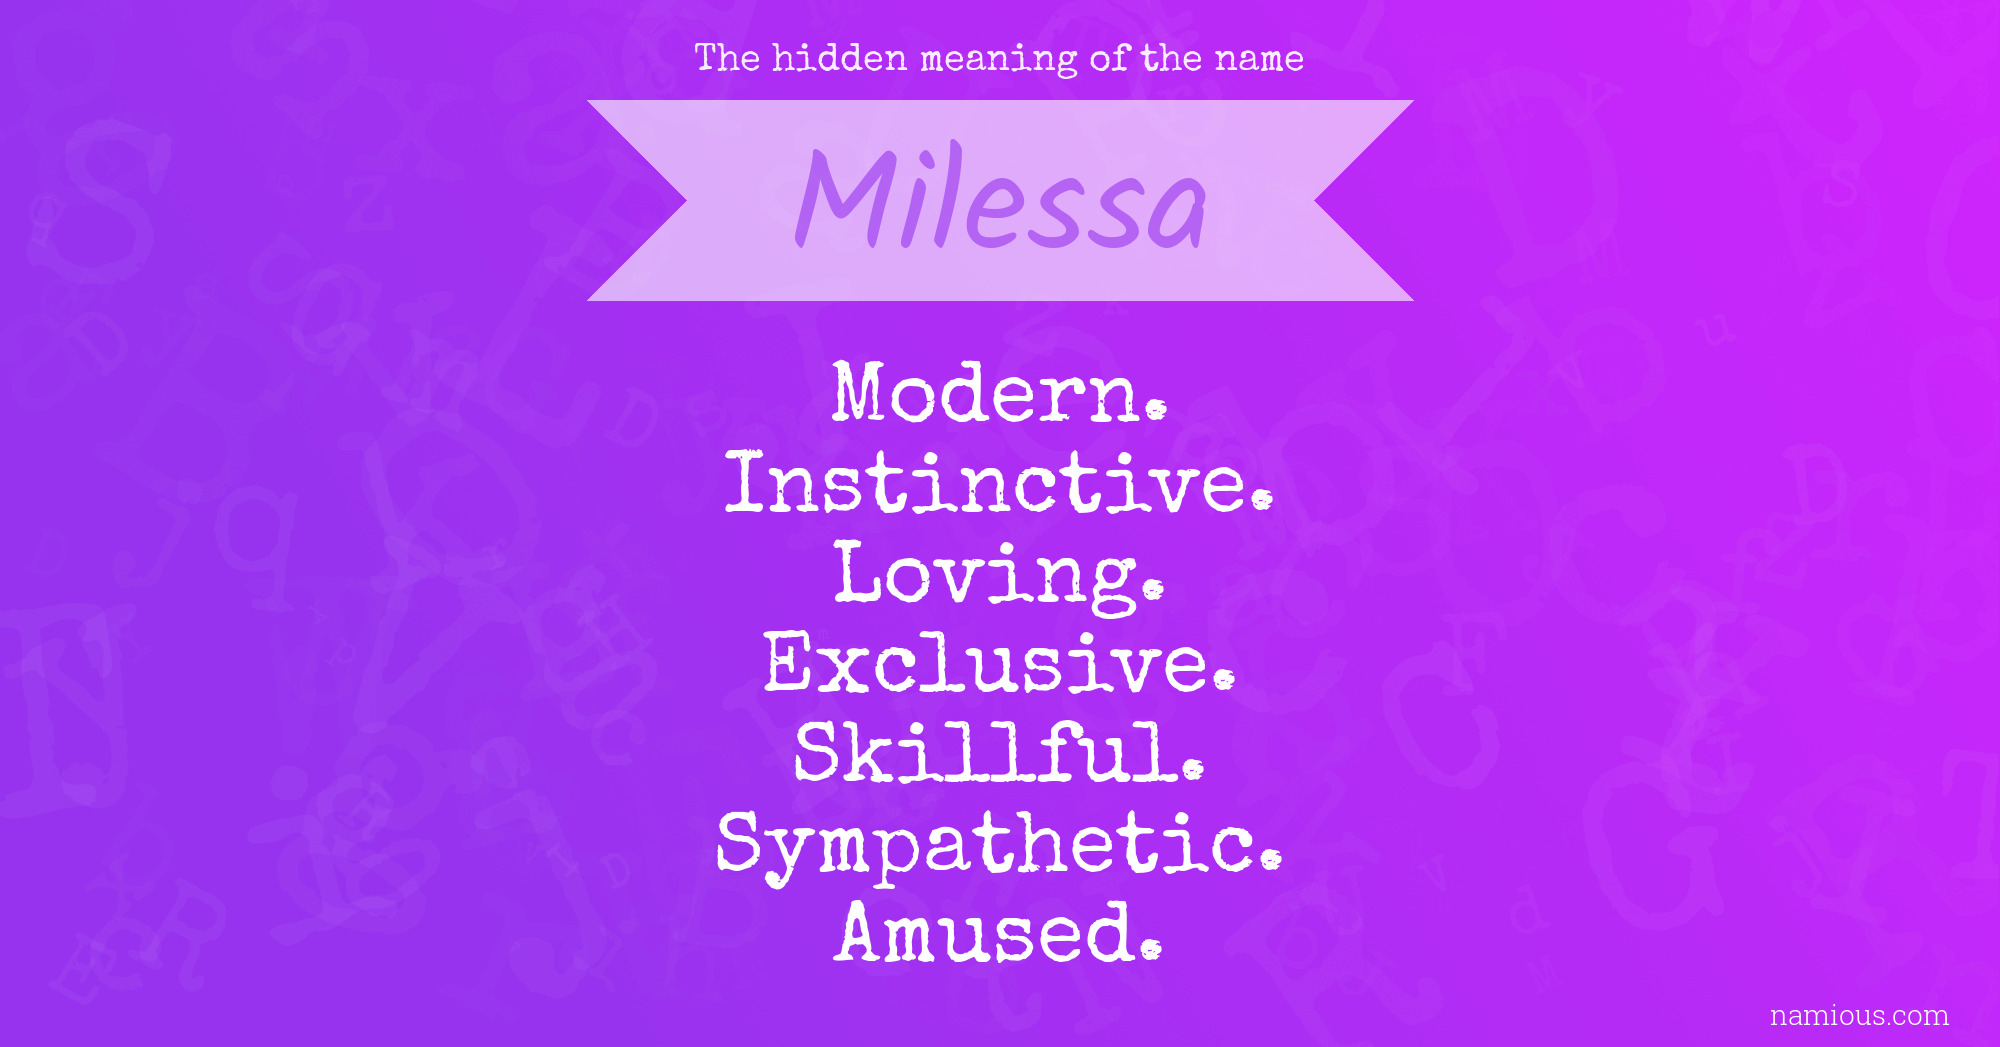 The hidden meaning of the name Milessa